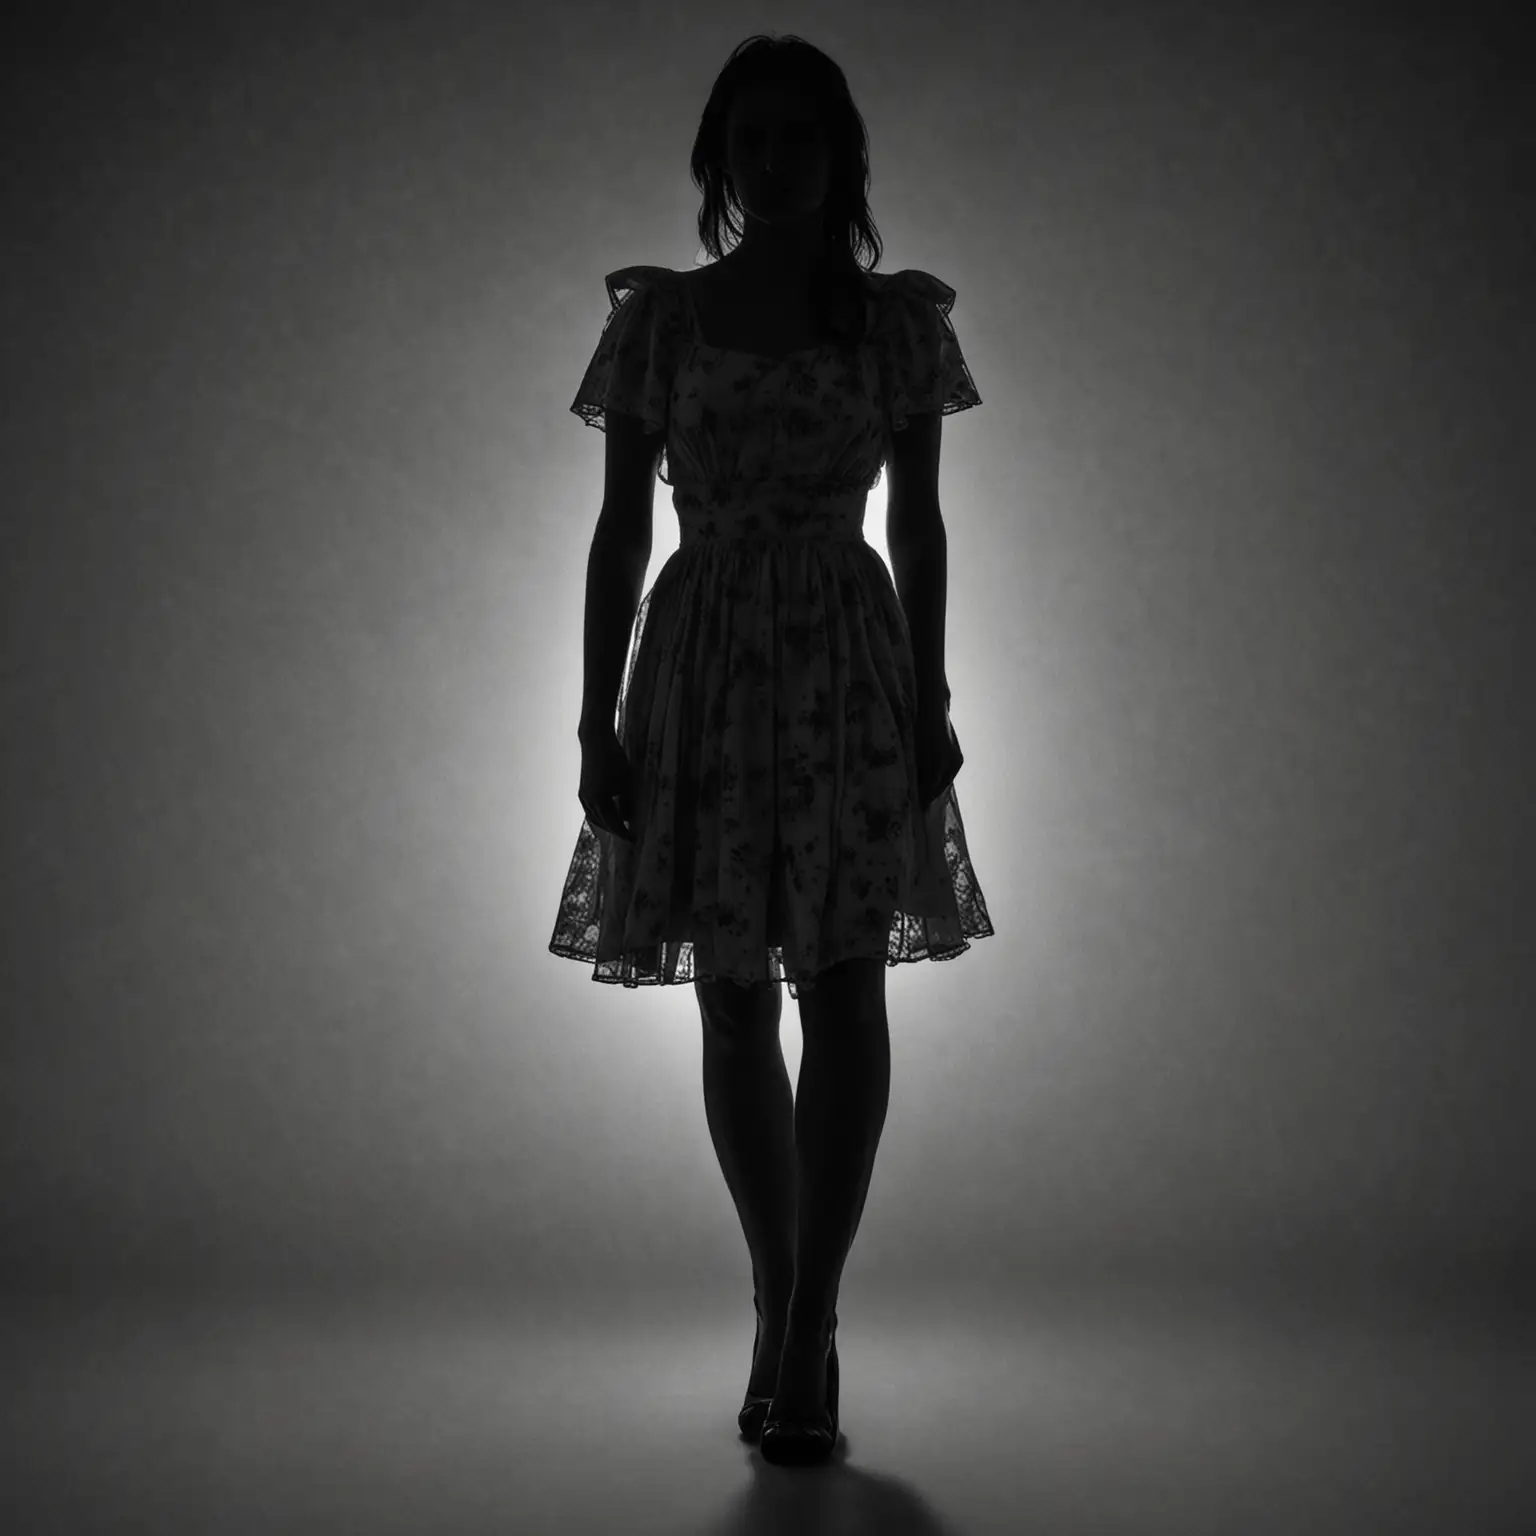 a short female silhouette，the female is in a dress, standing upright, facing me